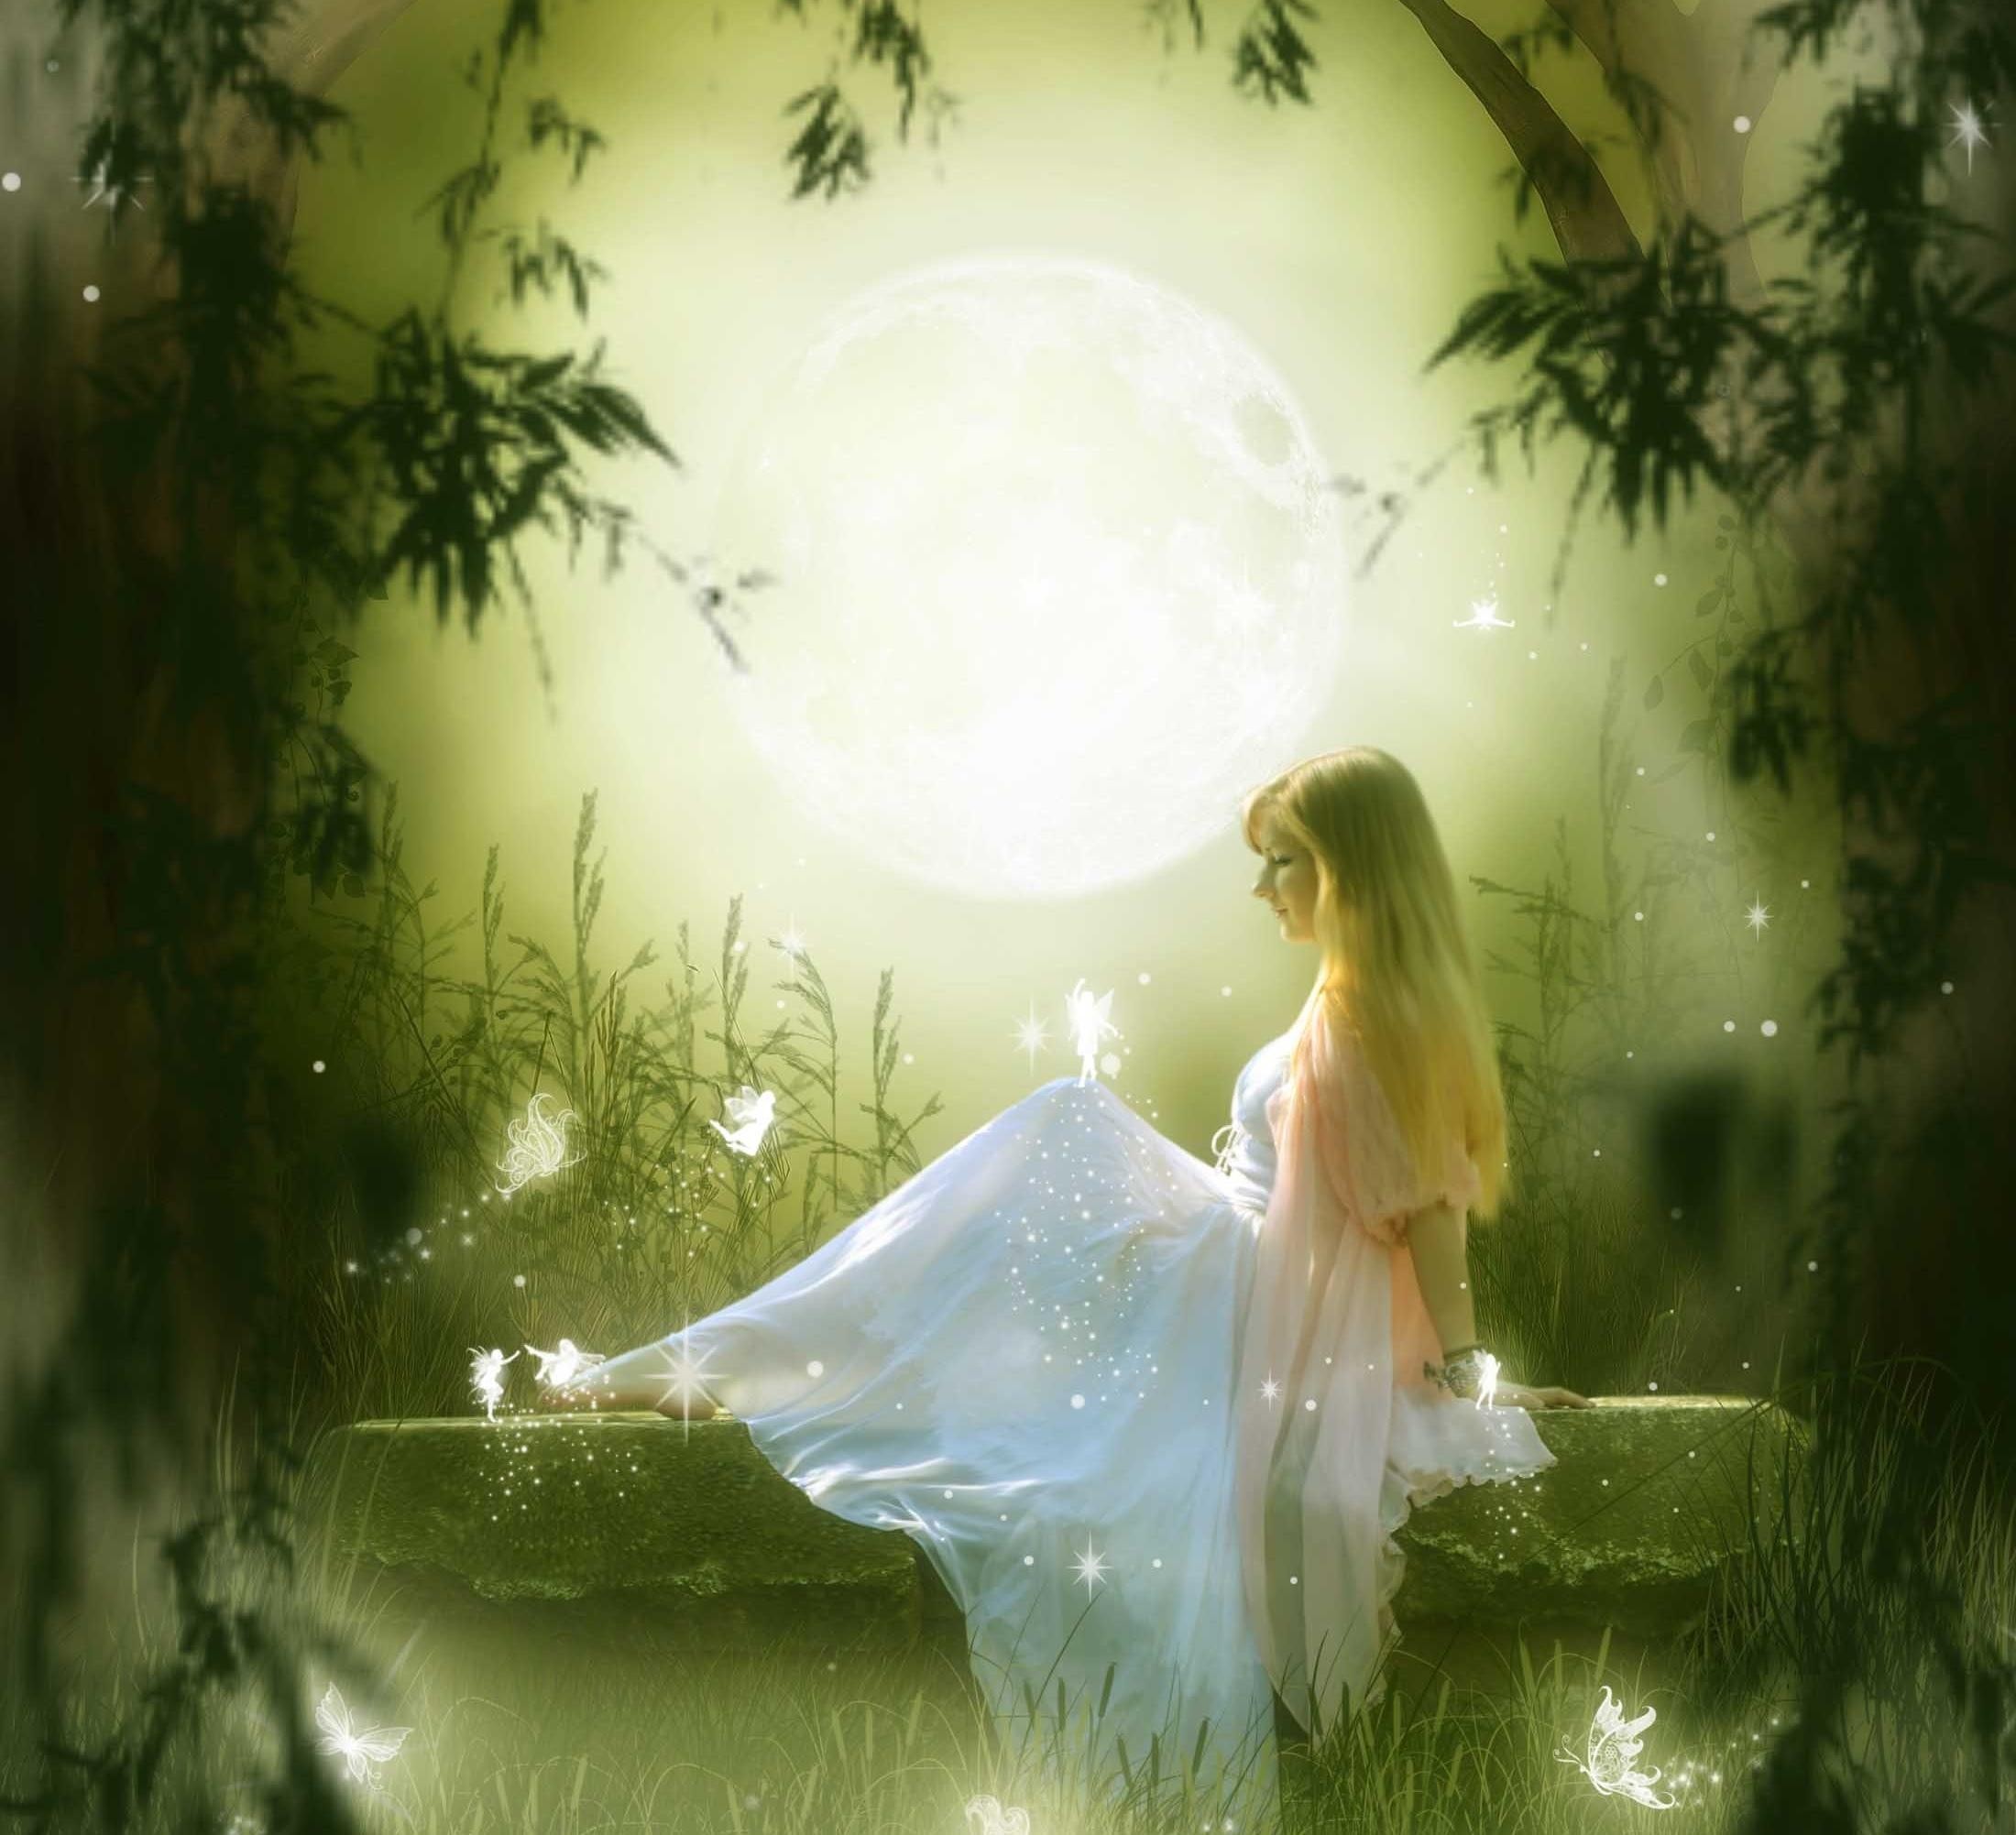 fairy wallpaper,people in nature,green,daydream,morning,cg artwork